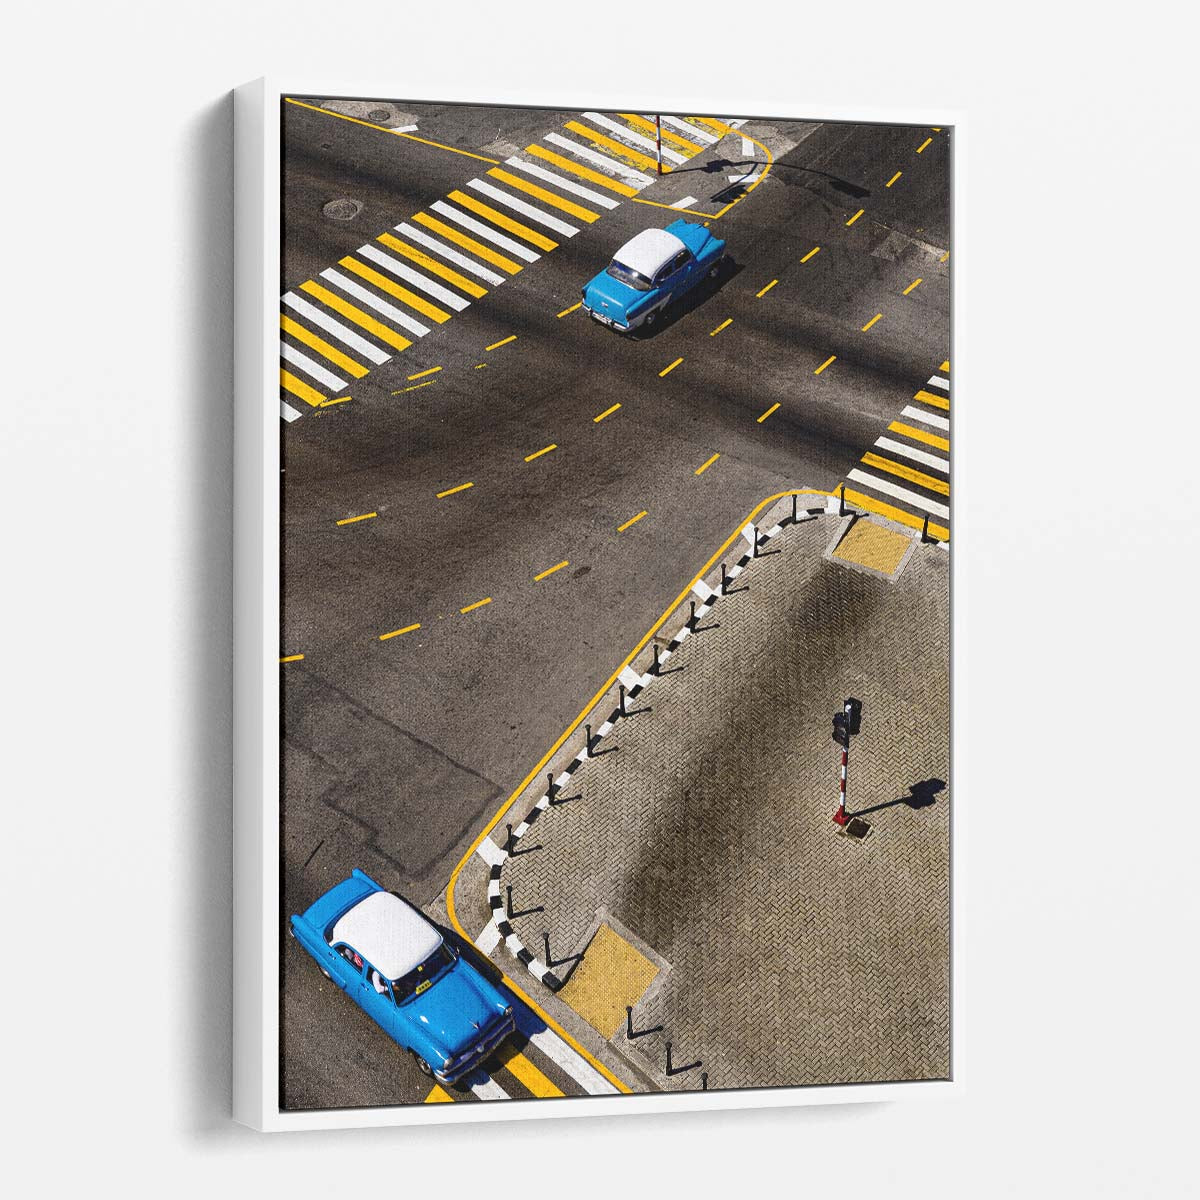 Vintage Havana Street Photography Classic Cars & Colorful Crosswalk Aerial View by Luxuriance Designs, made in USA